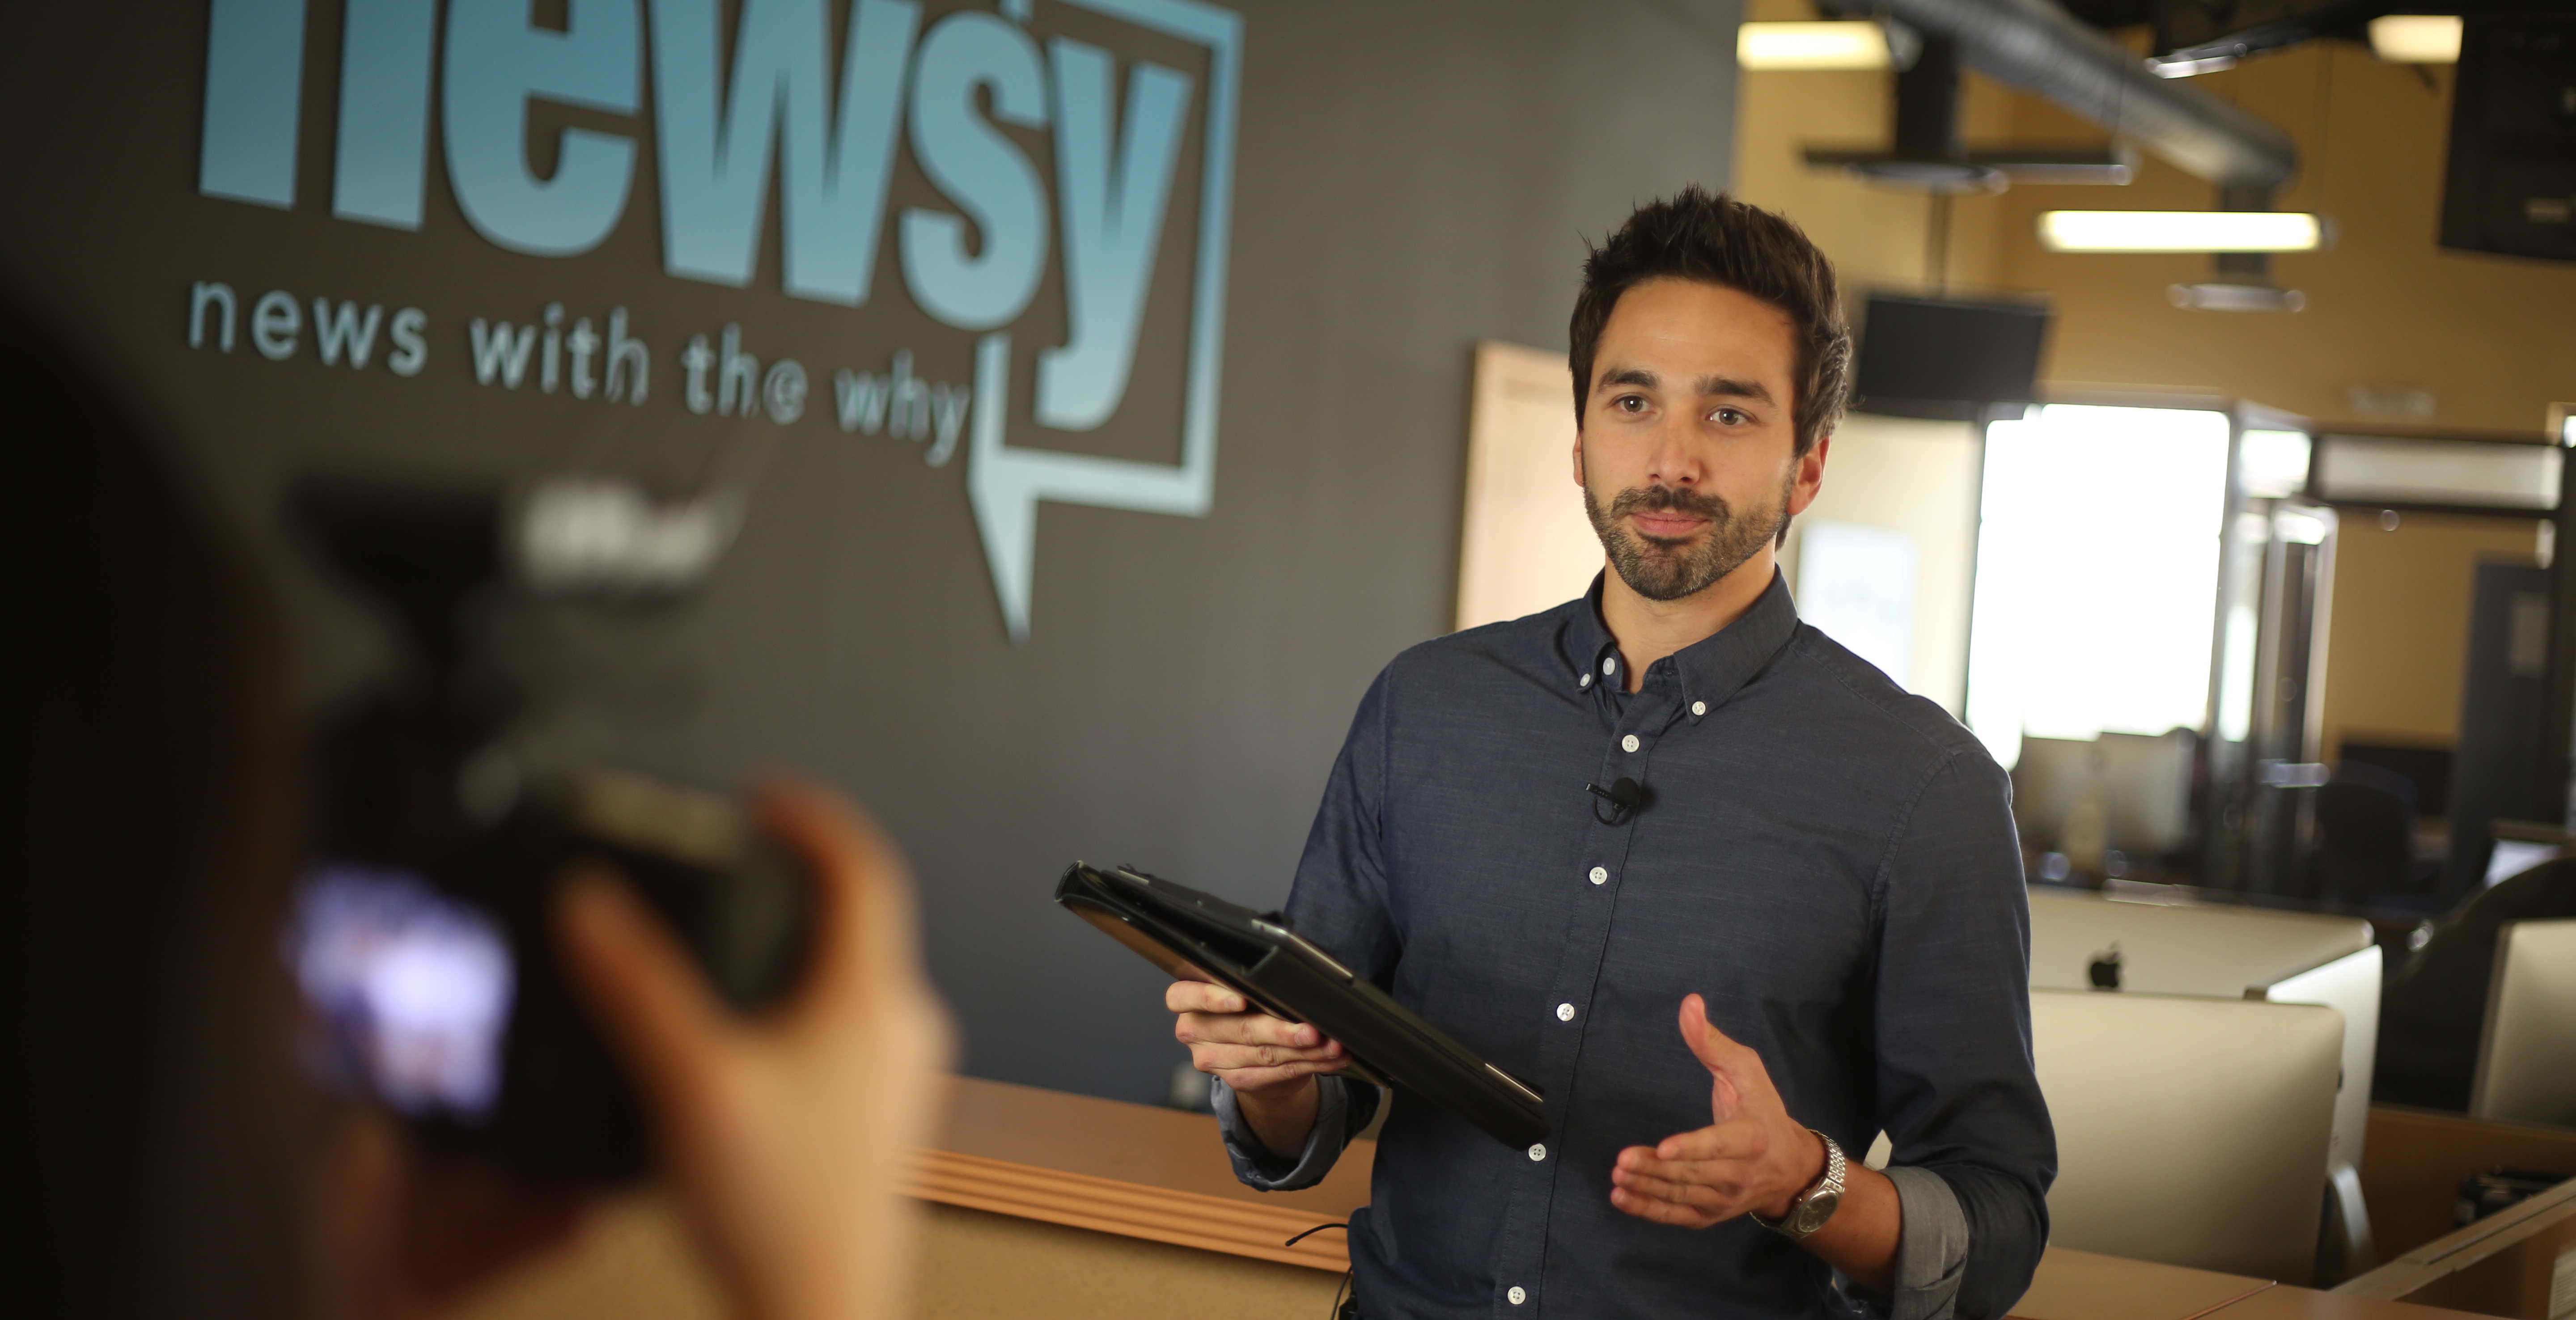 Newsy, owed by The E.W. Scripps Company, is a modern, national news network that creates quality video stories targeting a Millennial and Gen X demographic.